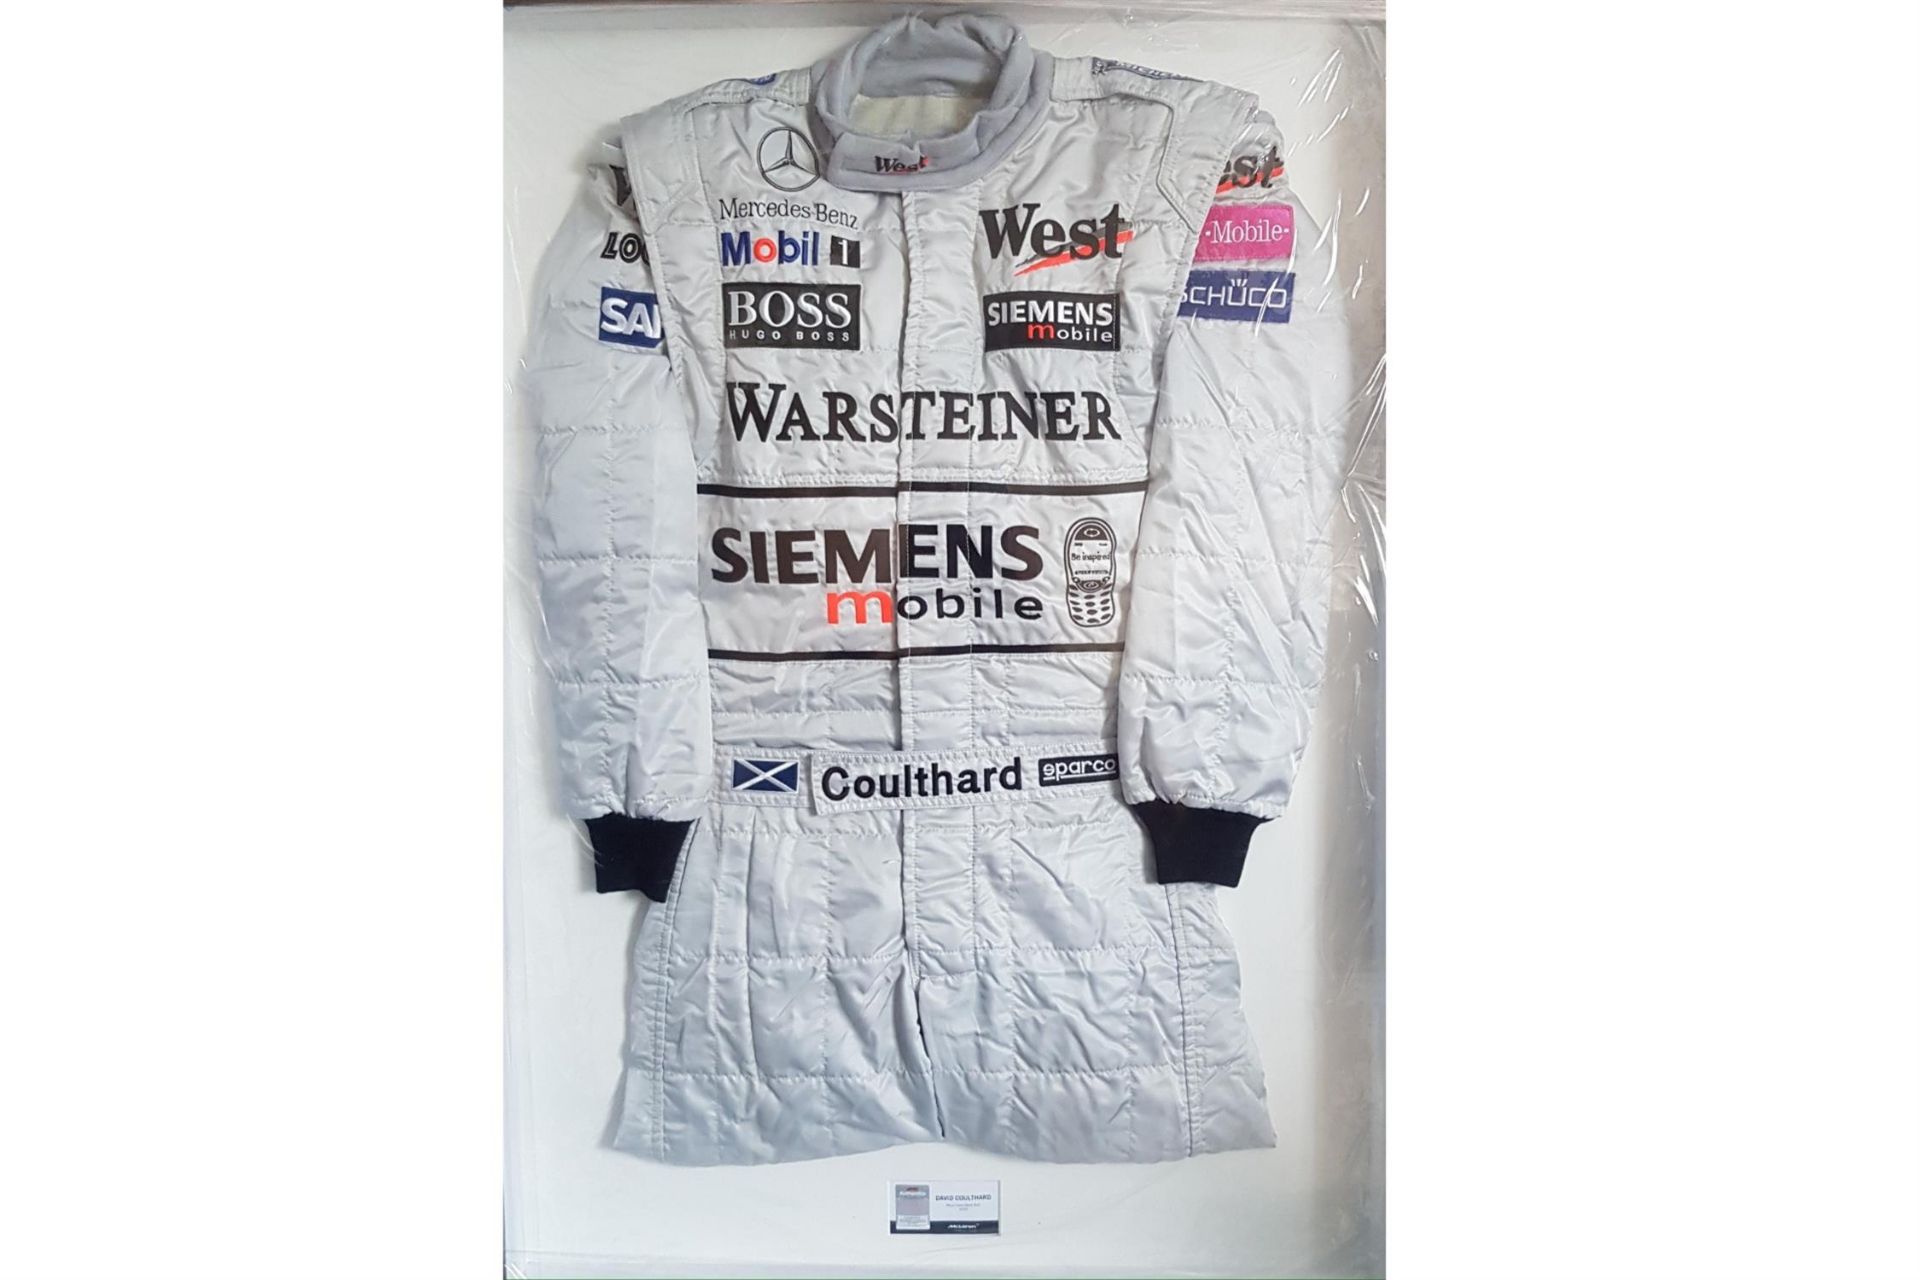 2003 David Coulthard Race Suit